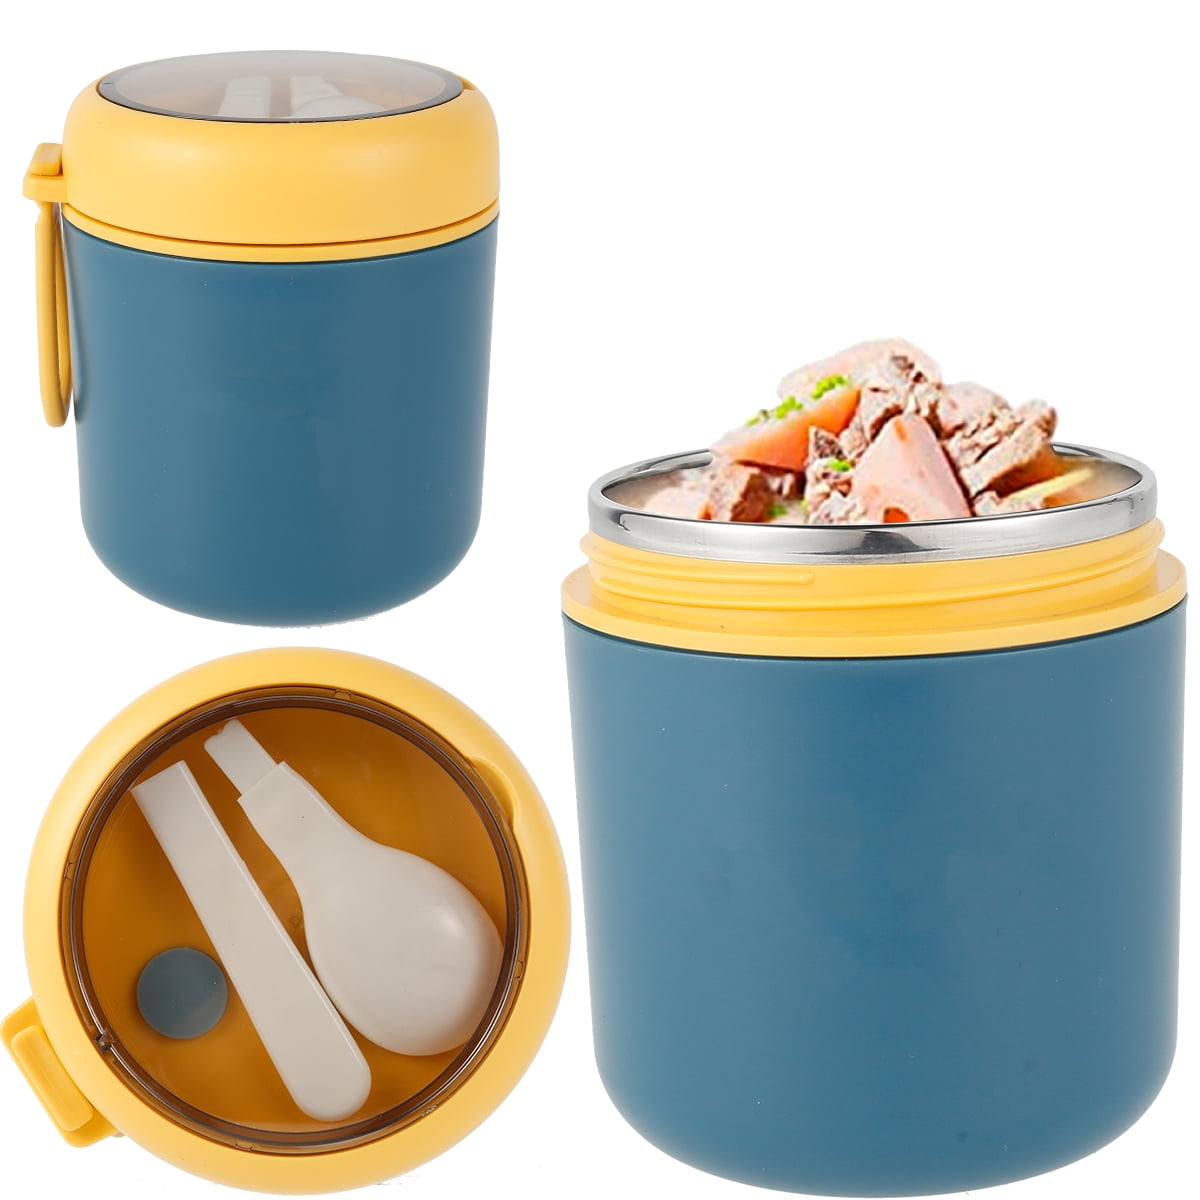 Vacuum Insulated Food Container 101: What is It? How does It Work